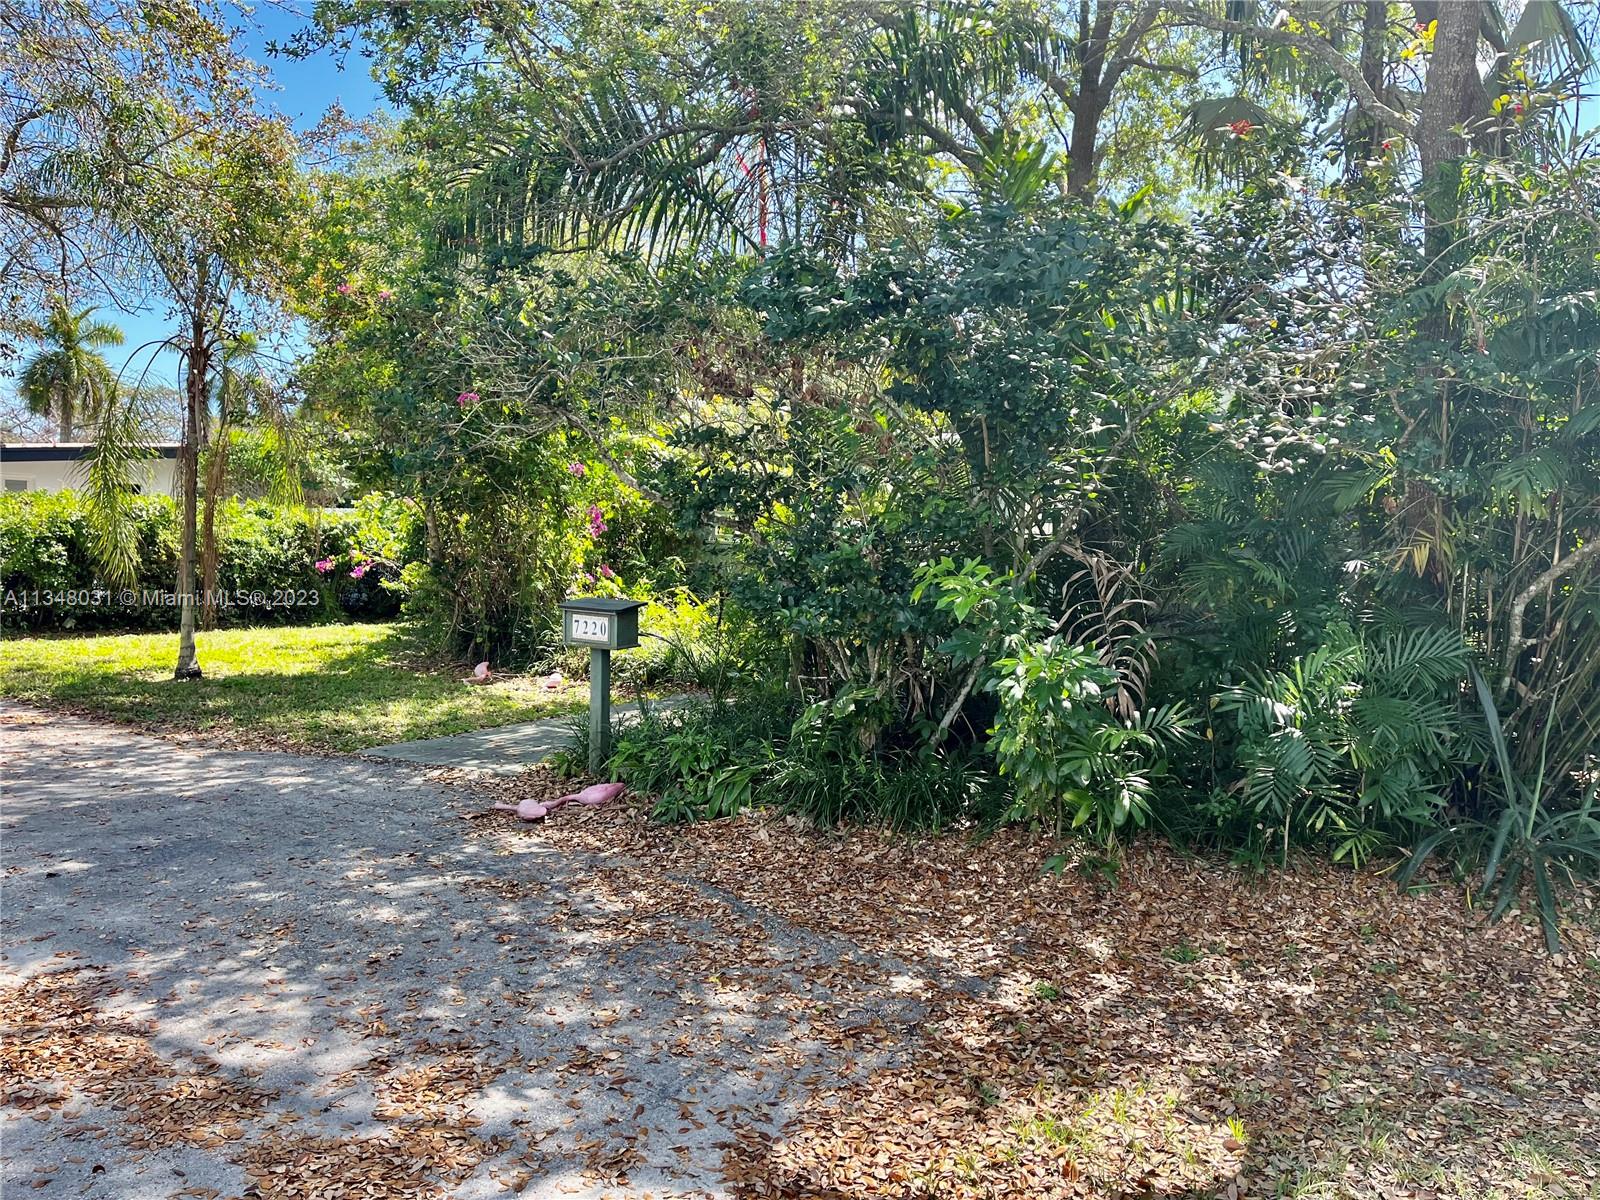 LOCATION! LOCATION! LOCATION! BUYERS BUILD YOUR DREAM HOME OR COMPLEATLY RENOVATE THIS NORTH
PINECREST HIDDEN GEM. THIS CORNER OVERSIZED BUILERS HALF ACRE HOME OFFERS MATURE OAK TREES, HIGH VAULTED WOOD BEAM CEILINGS, LOTS OF STORAGE, LARGE BACK YARD AND POOL.  A+ SCHOOLS.